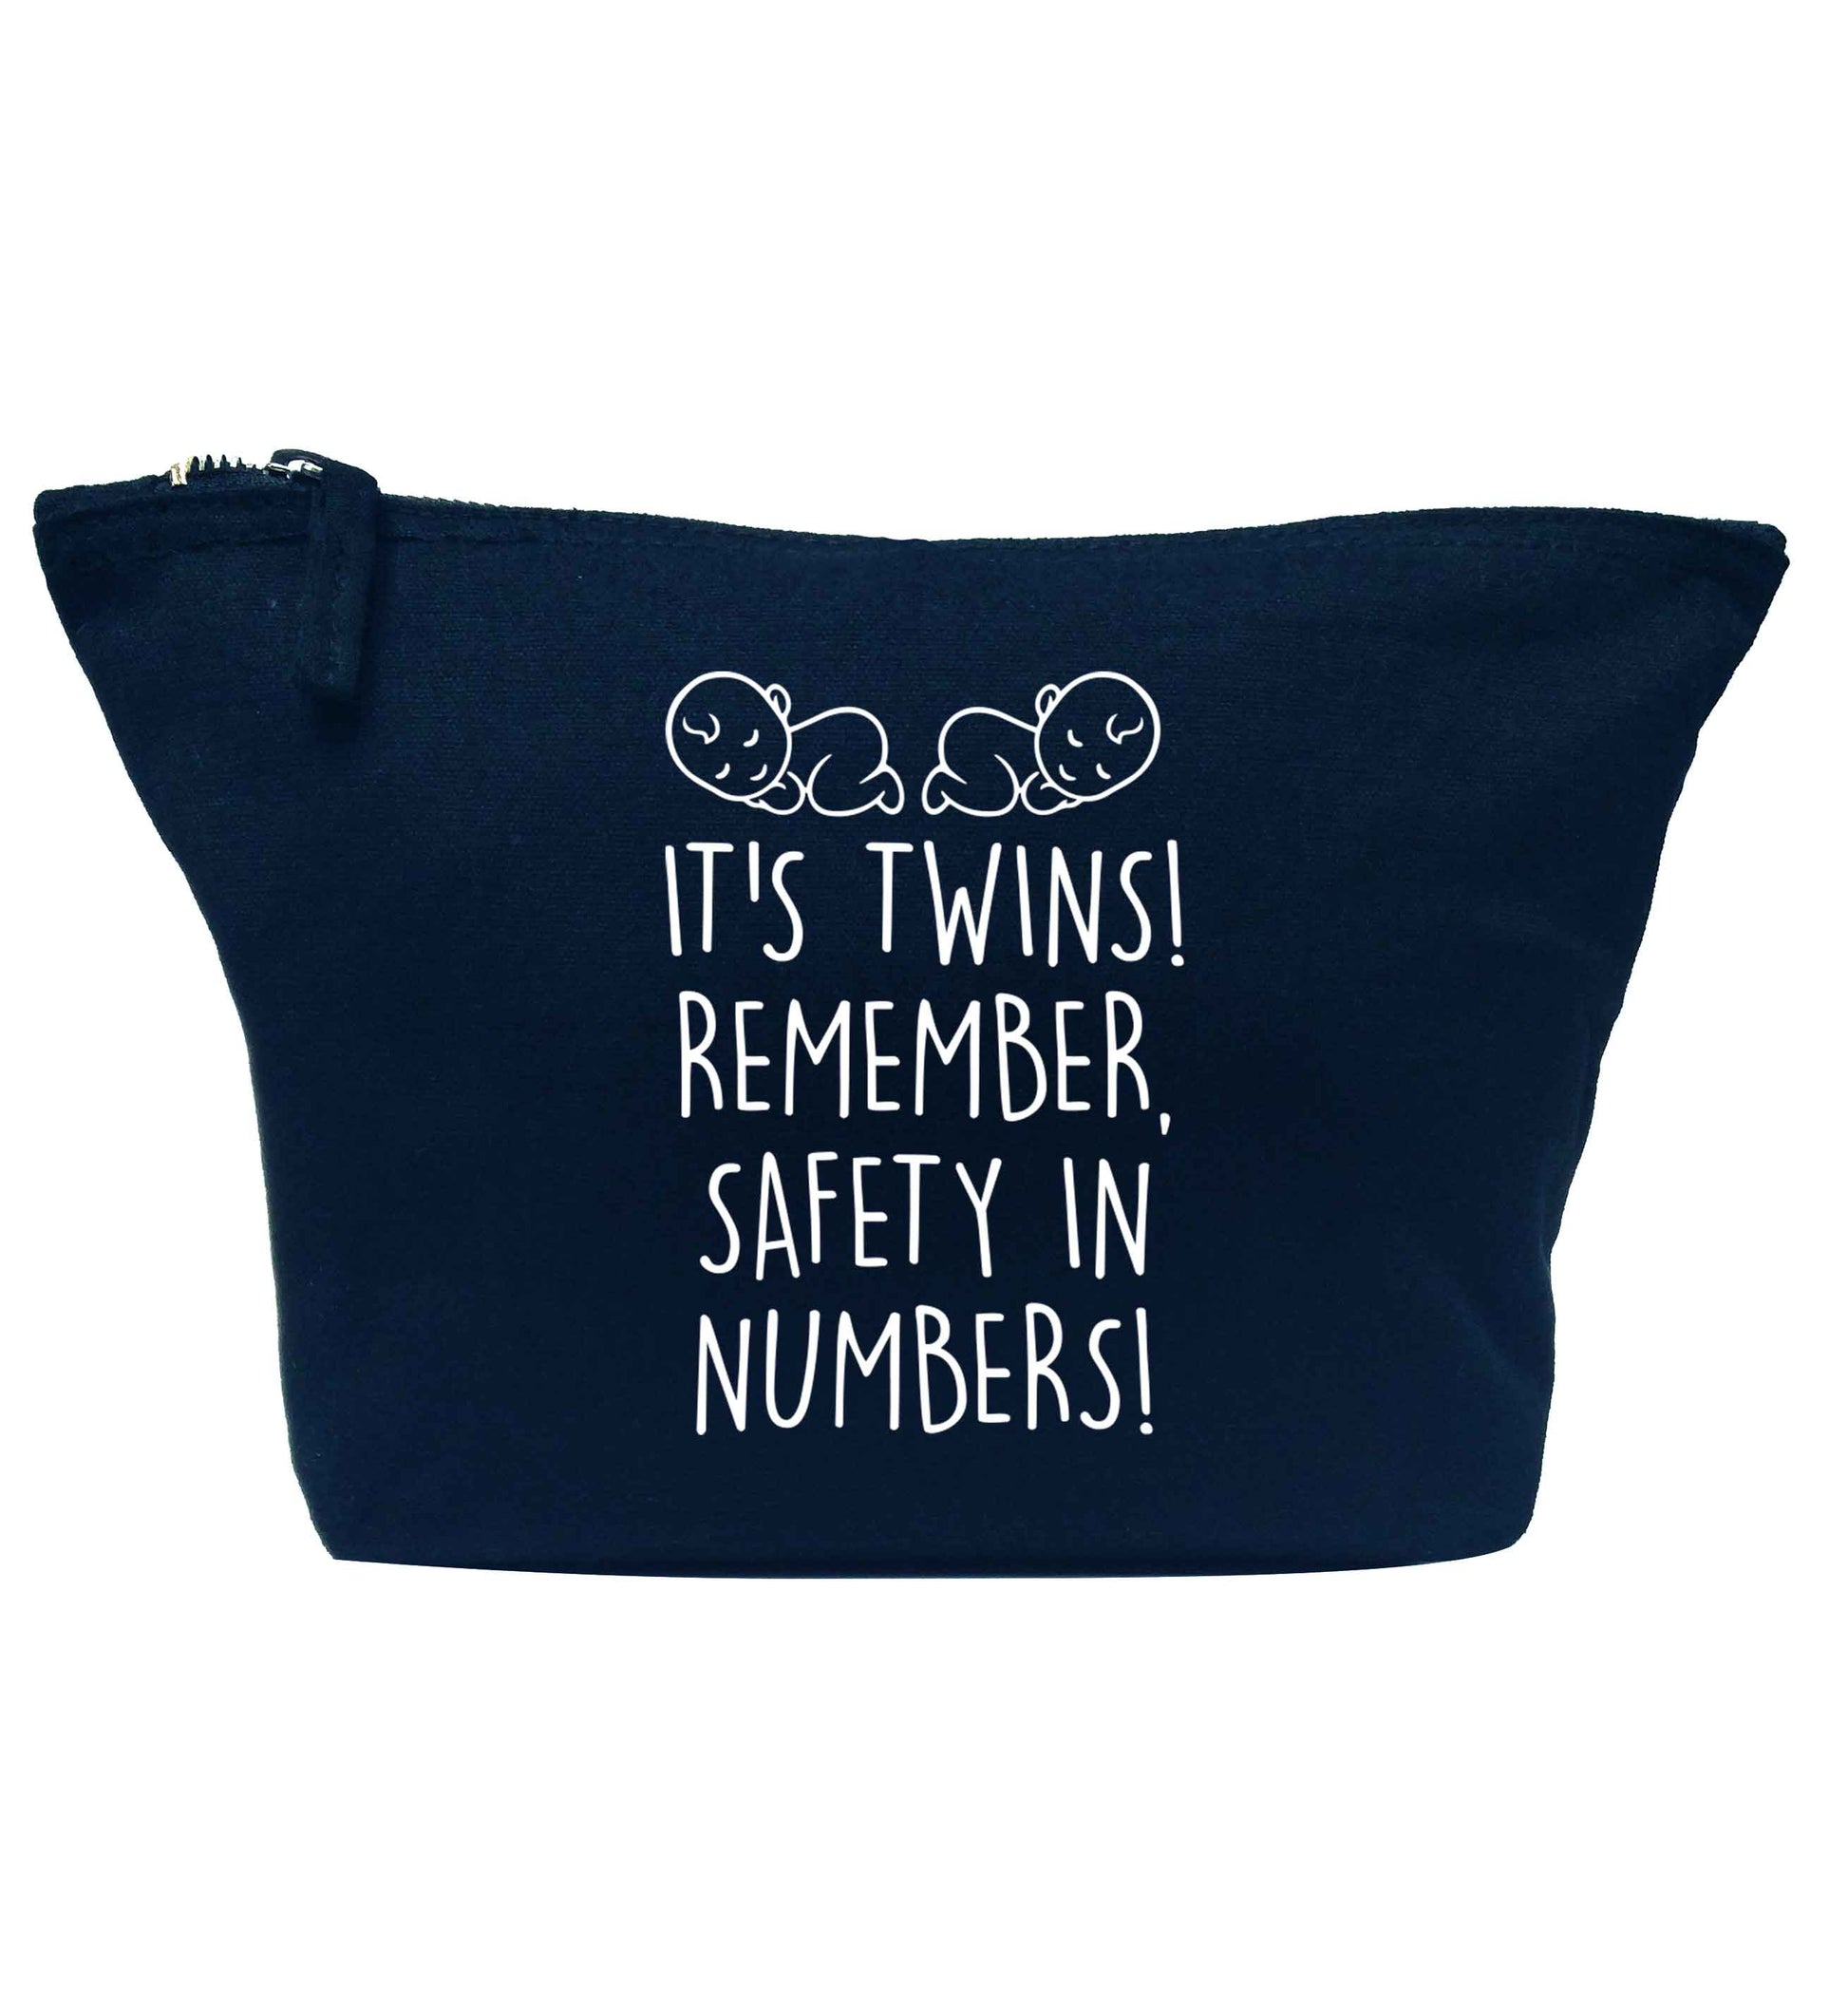 It's twins! Remember safety in numbers! navy makeup bag